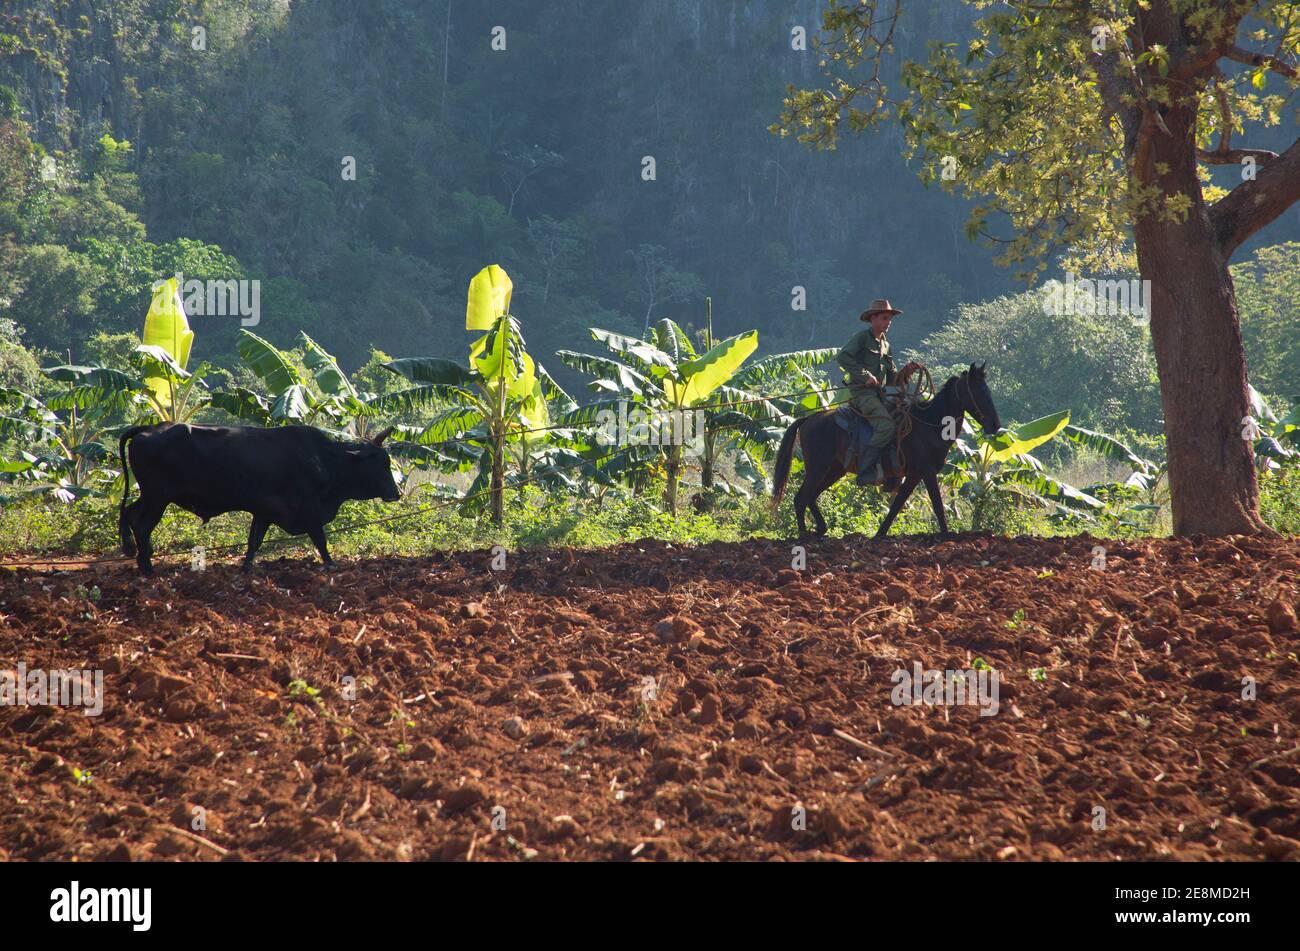 Cowboy on horse leading an Ox across ploughed field, The Vinales Valley, Pinar del Rio, Cuba Stock Photo